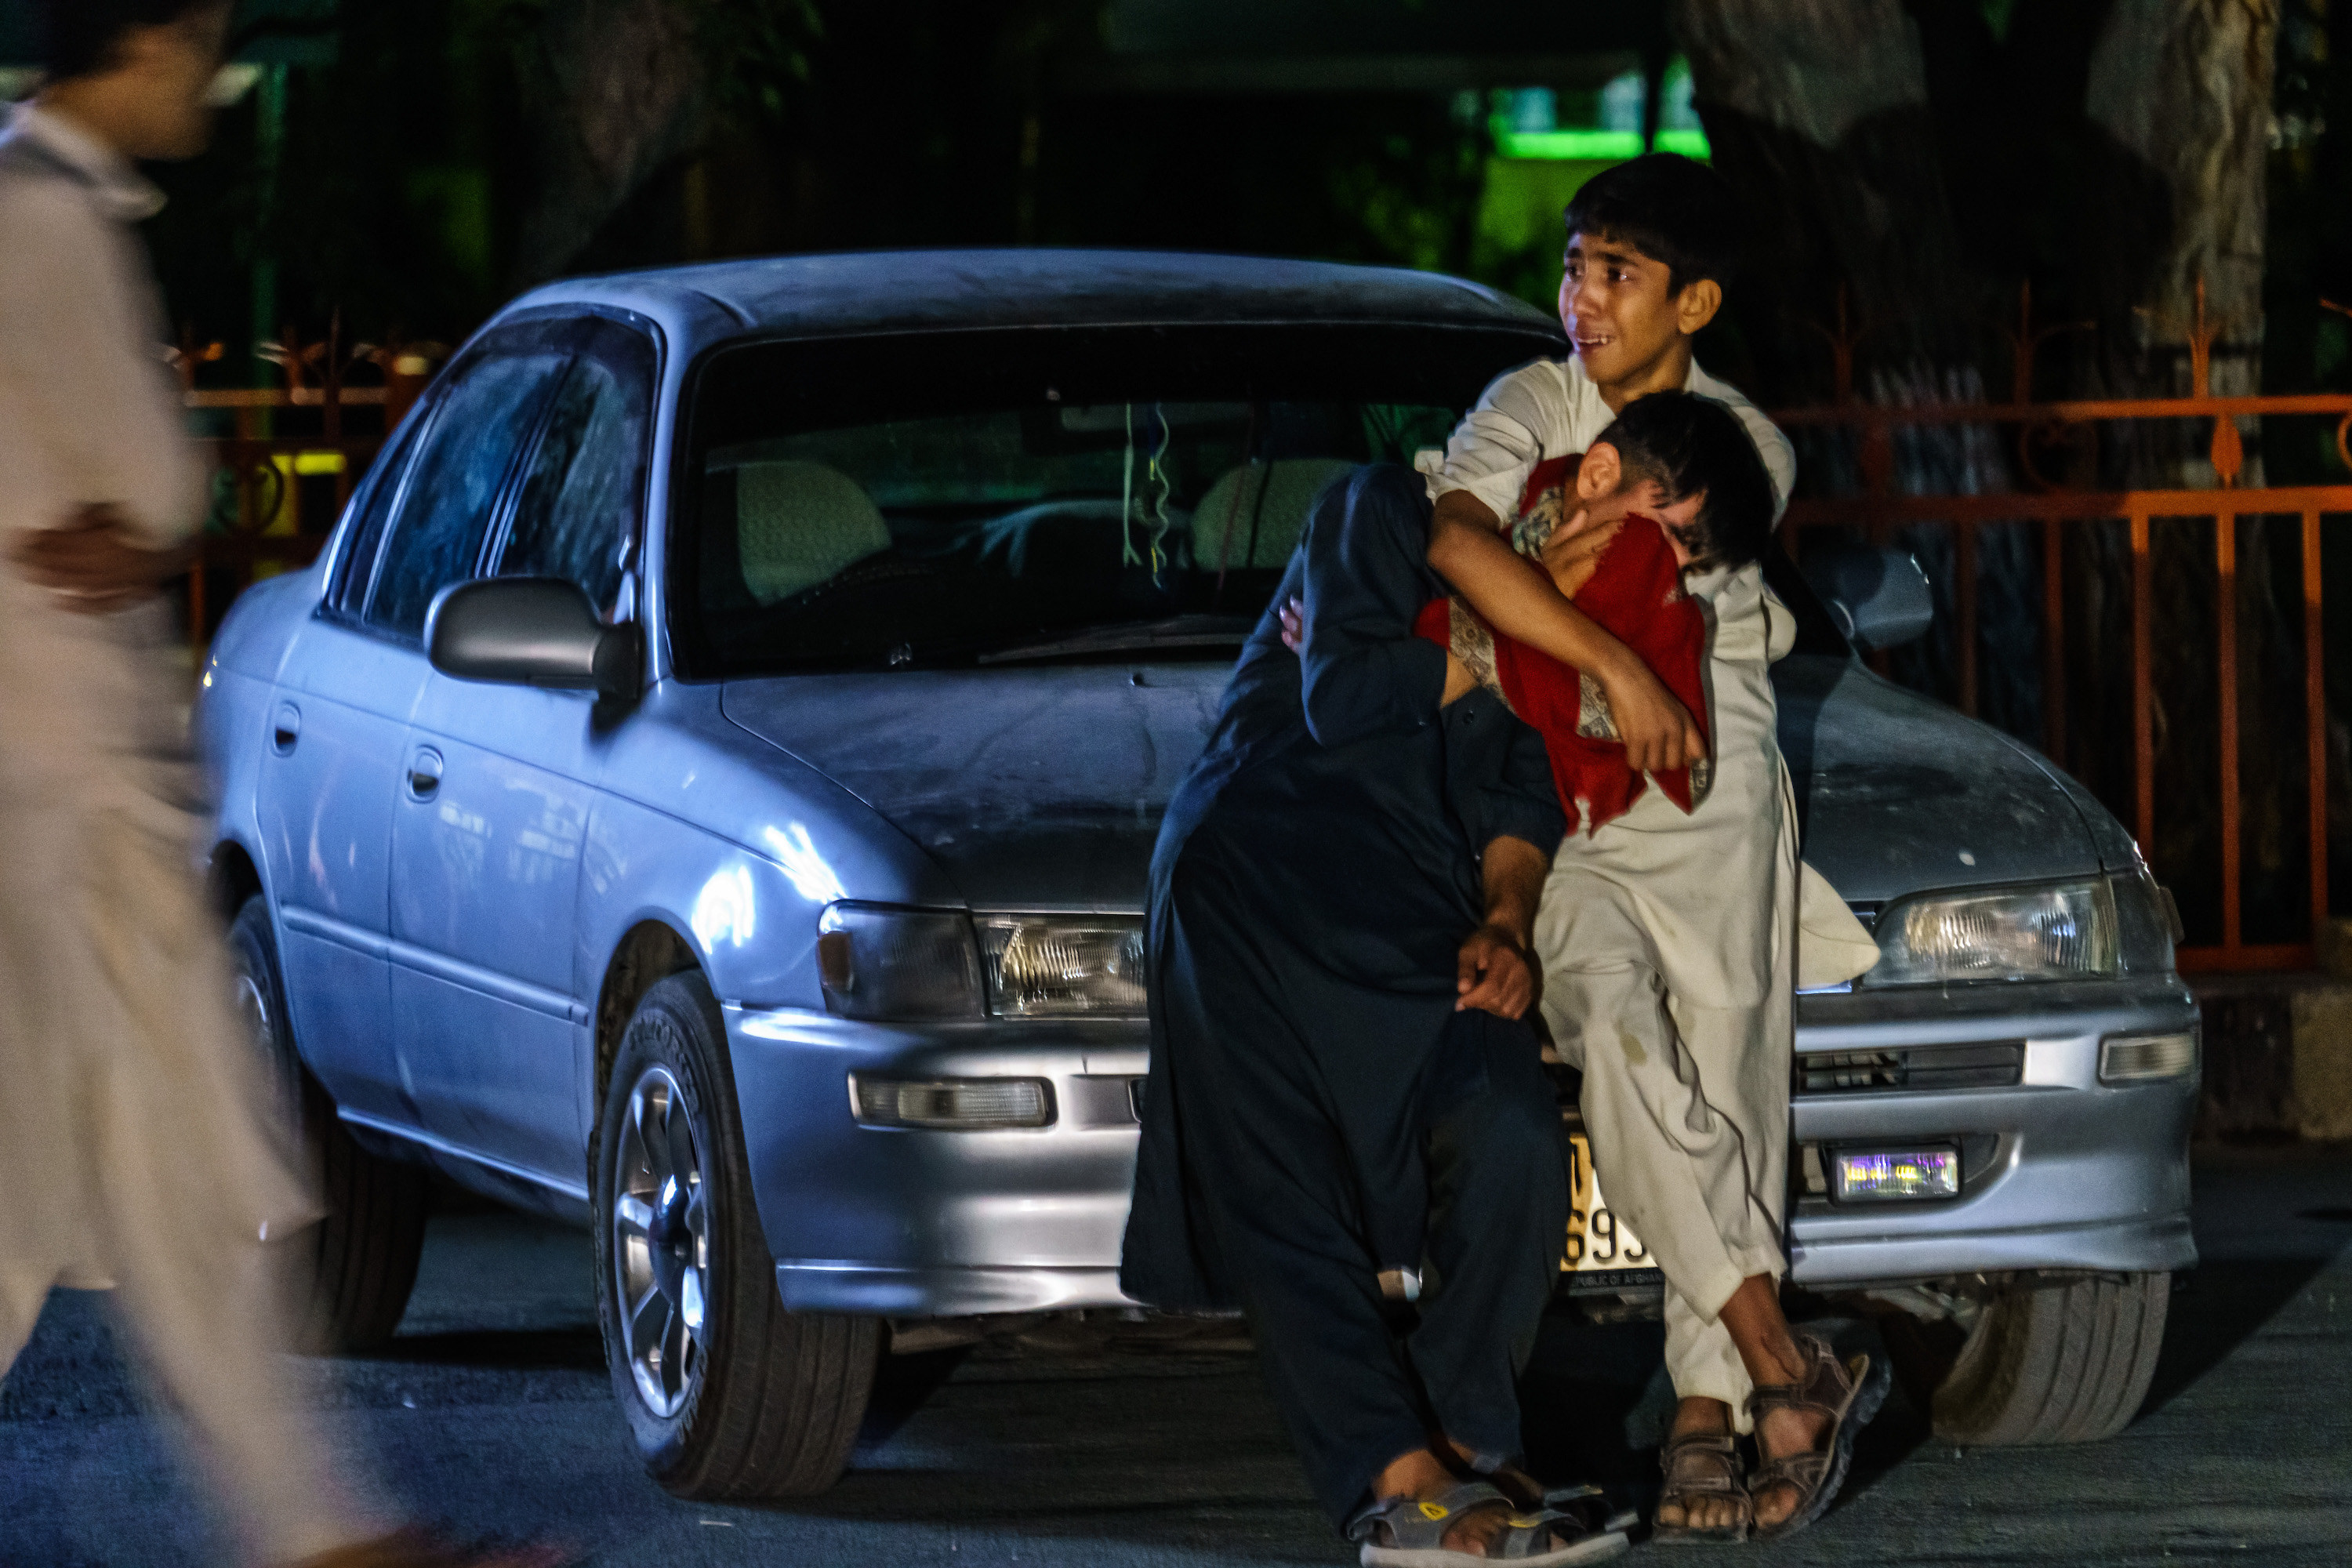 Two young Afghan boys, both weeping, hold each other